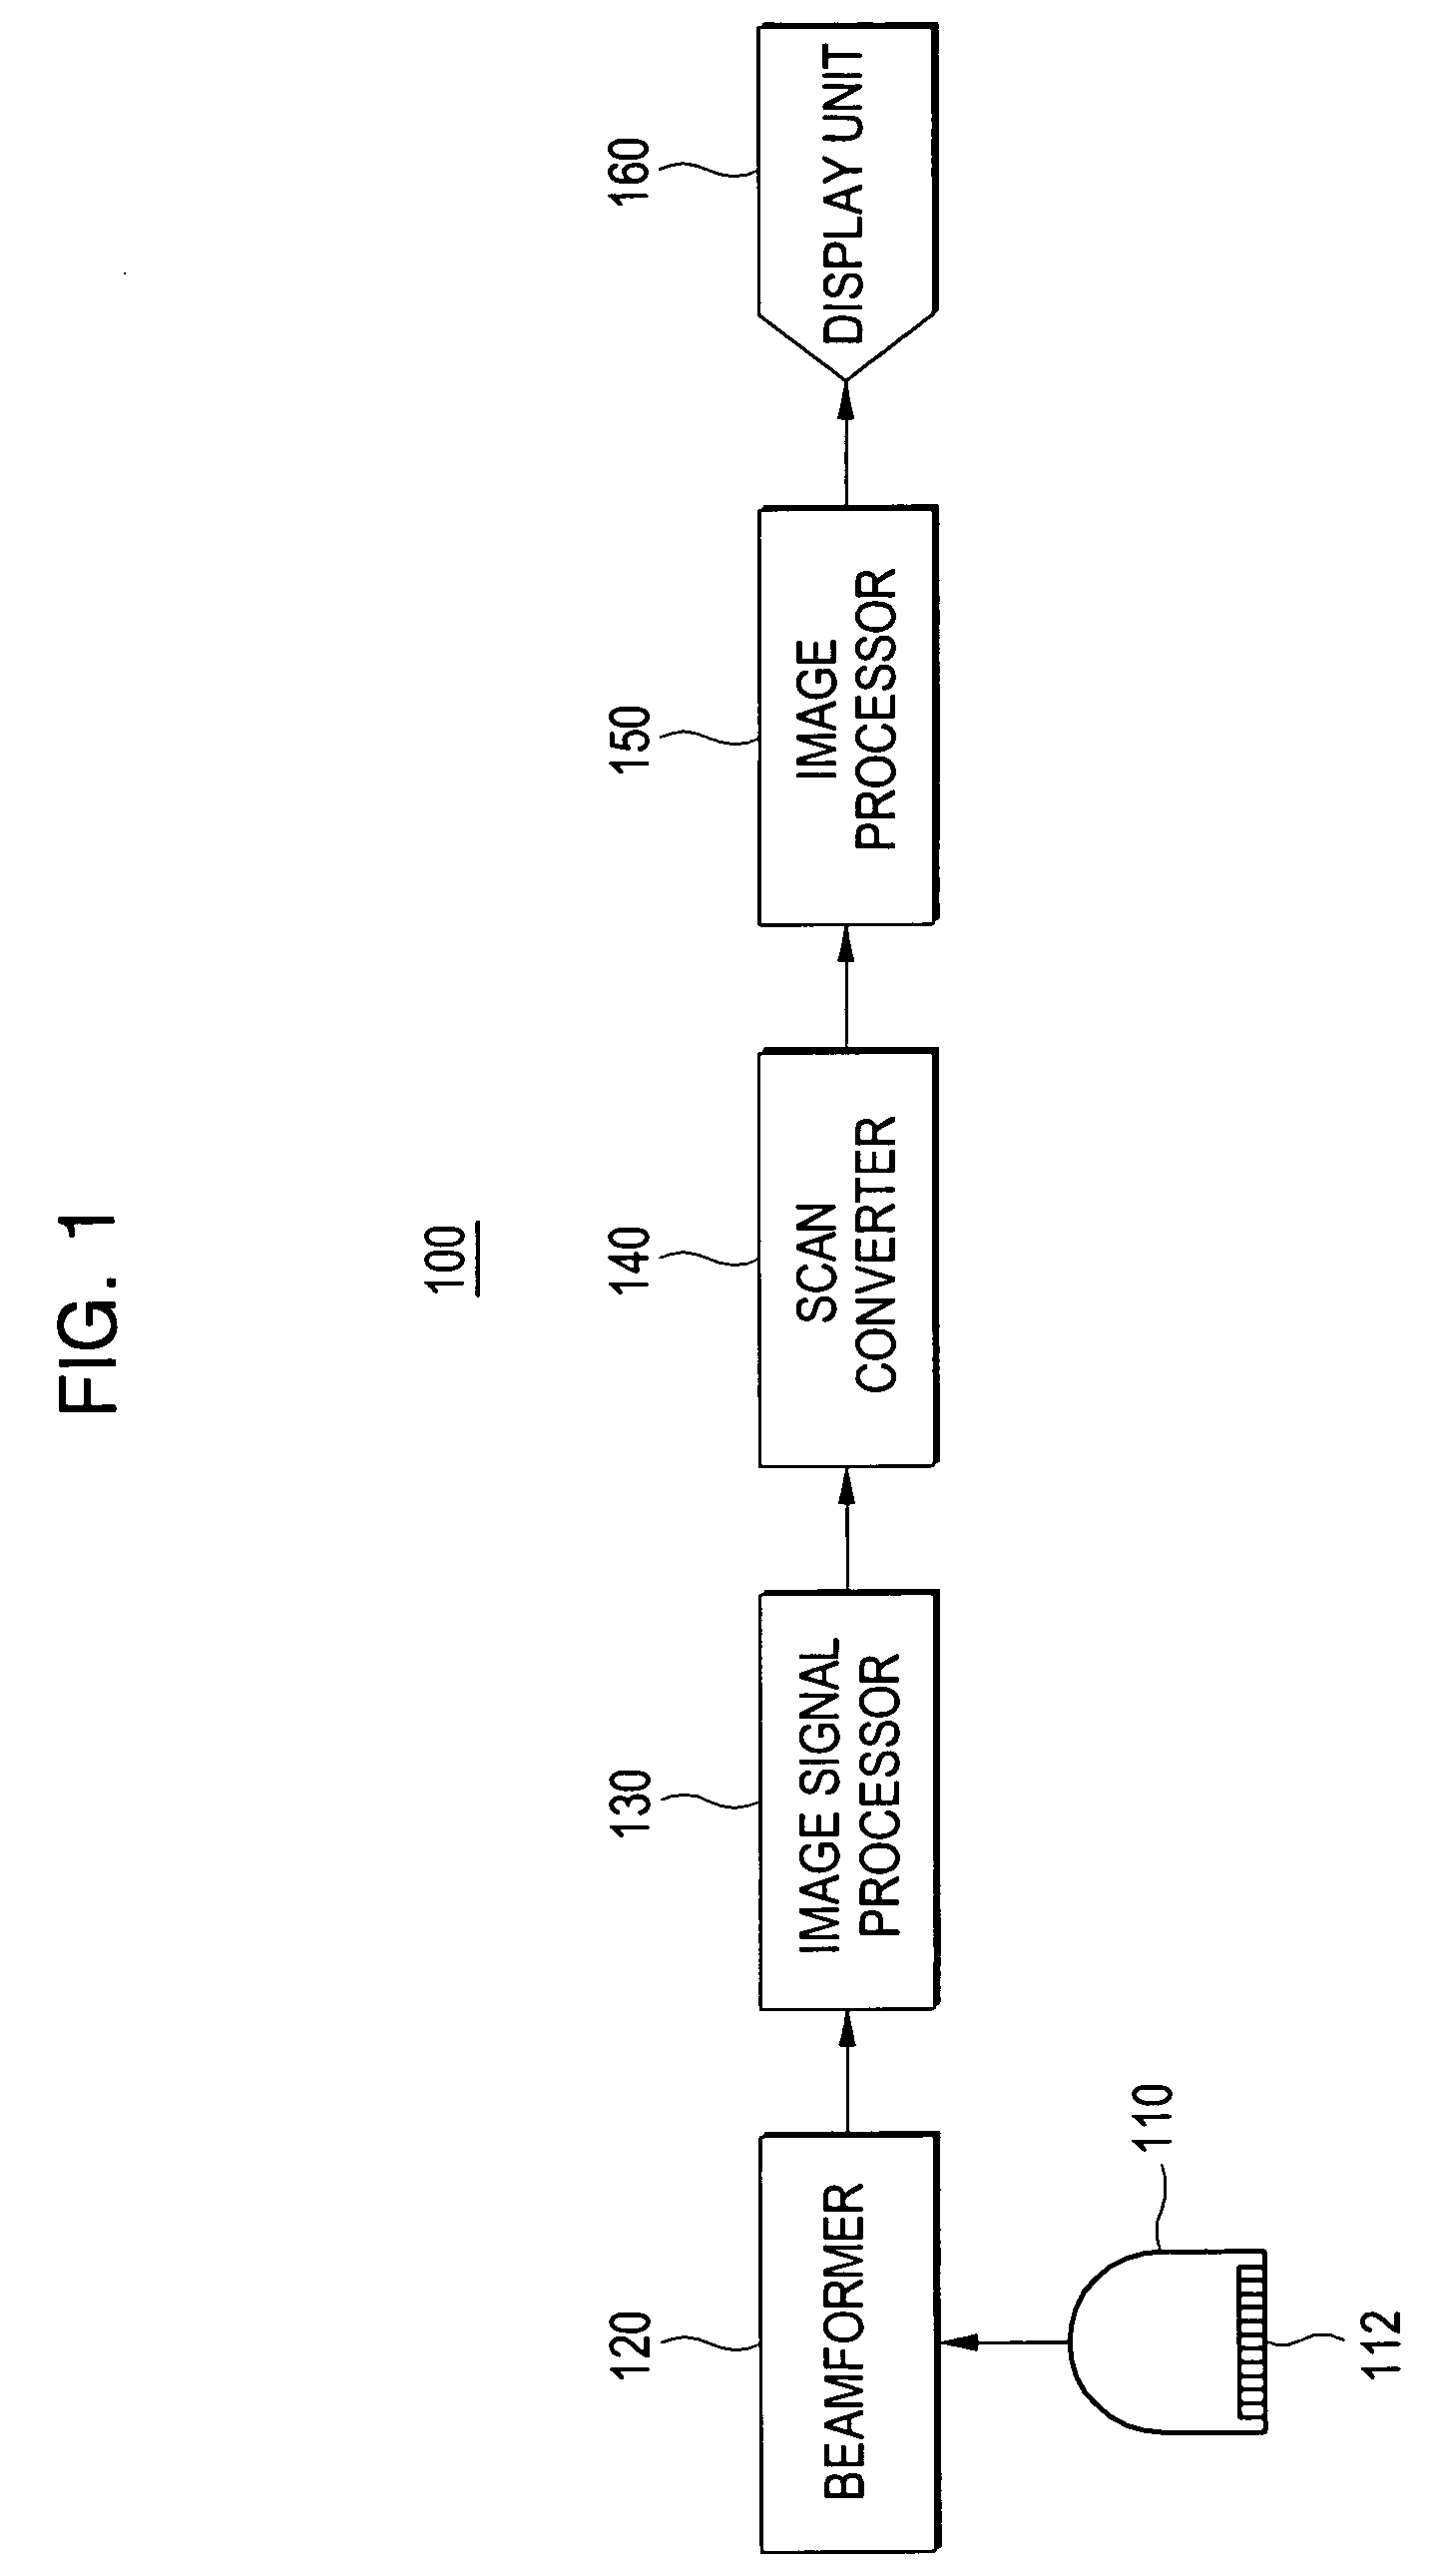 Ultrasound diagnostic system and method of automatically controlling brightness and contrast of a three-dimensional ultrasound image